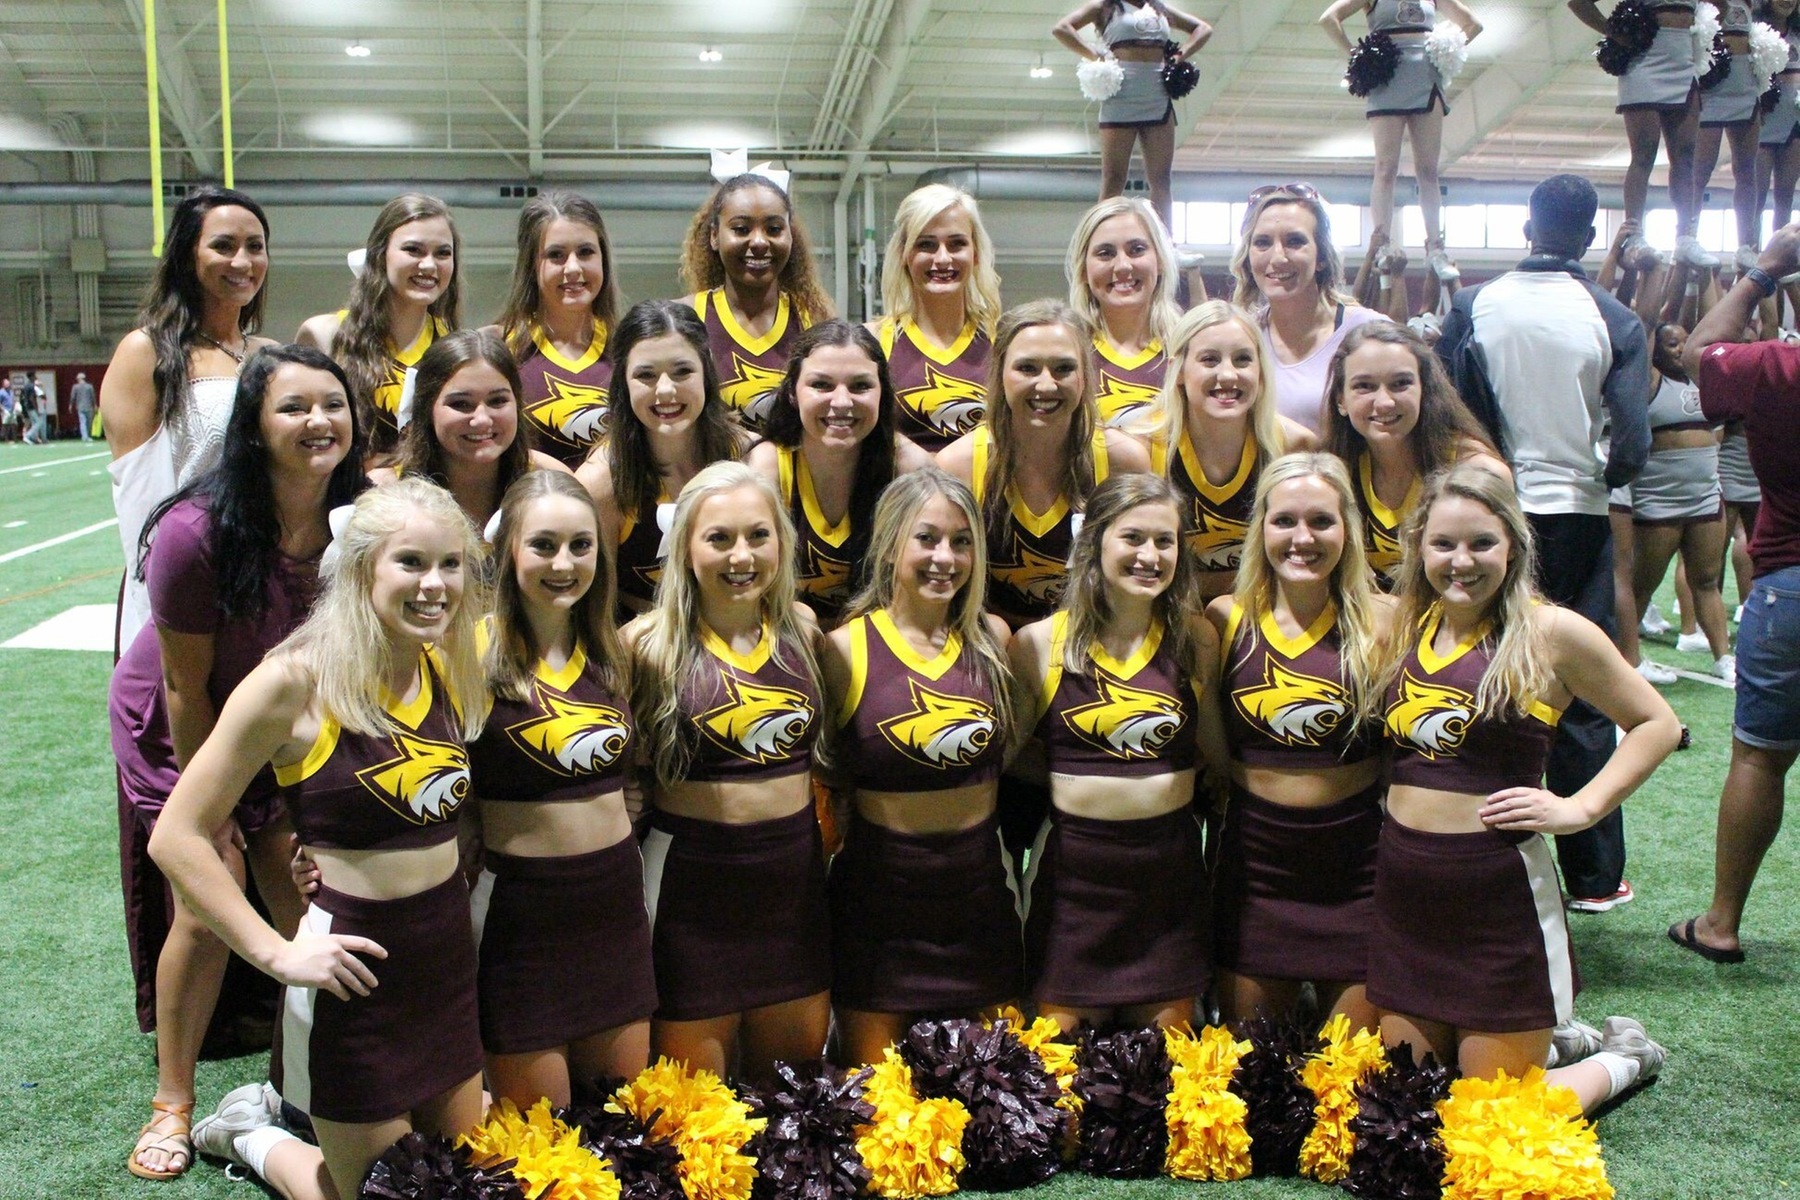 The Pearl River Community College cheerleaders recently competed at the UCA College Spirit Camp, hosted at the University of Alabama. The squad won All-Superior ribbons in each evaluation and placed third in its division. Mascot, W.C. Rivers, also picked up an All-Superior honor. (PRCC ATHLETICS)